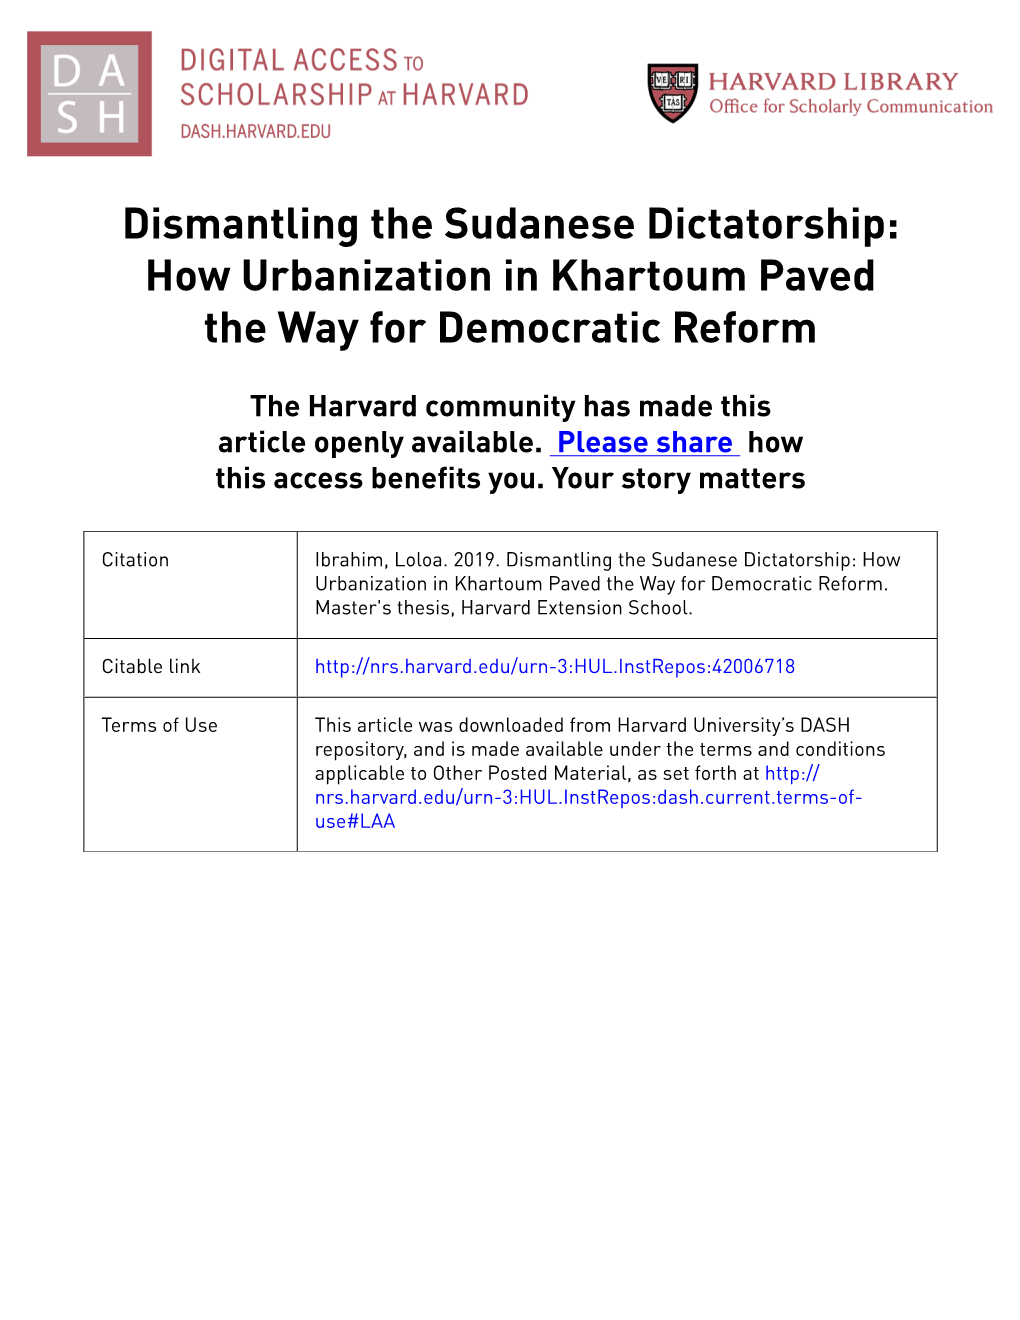 Dismantling the Sudanese Dictatorship: How Urbanization in Khartoum Paved the Way for Democratic Reform